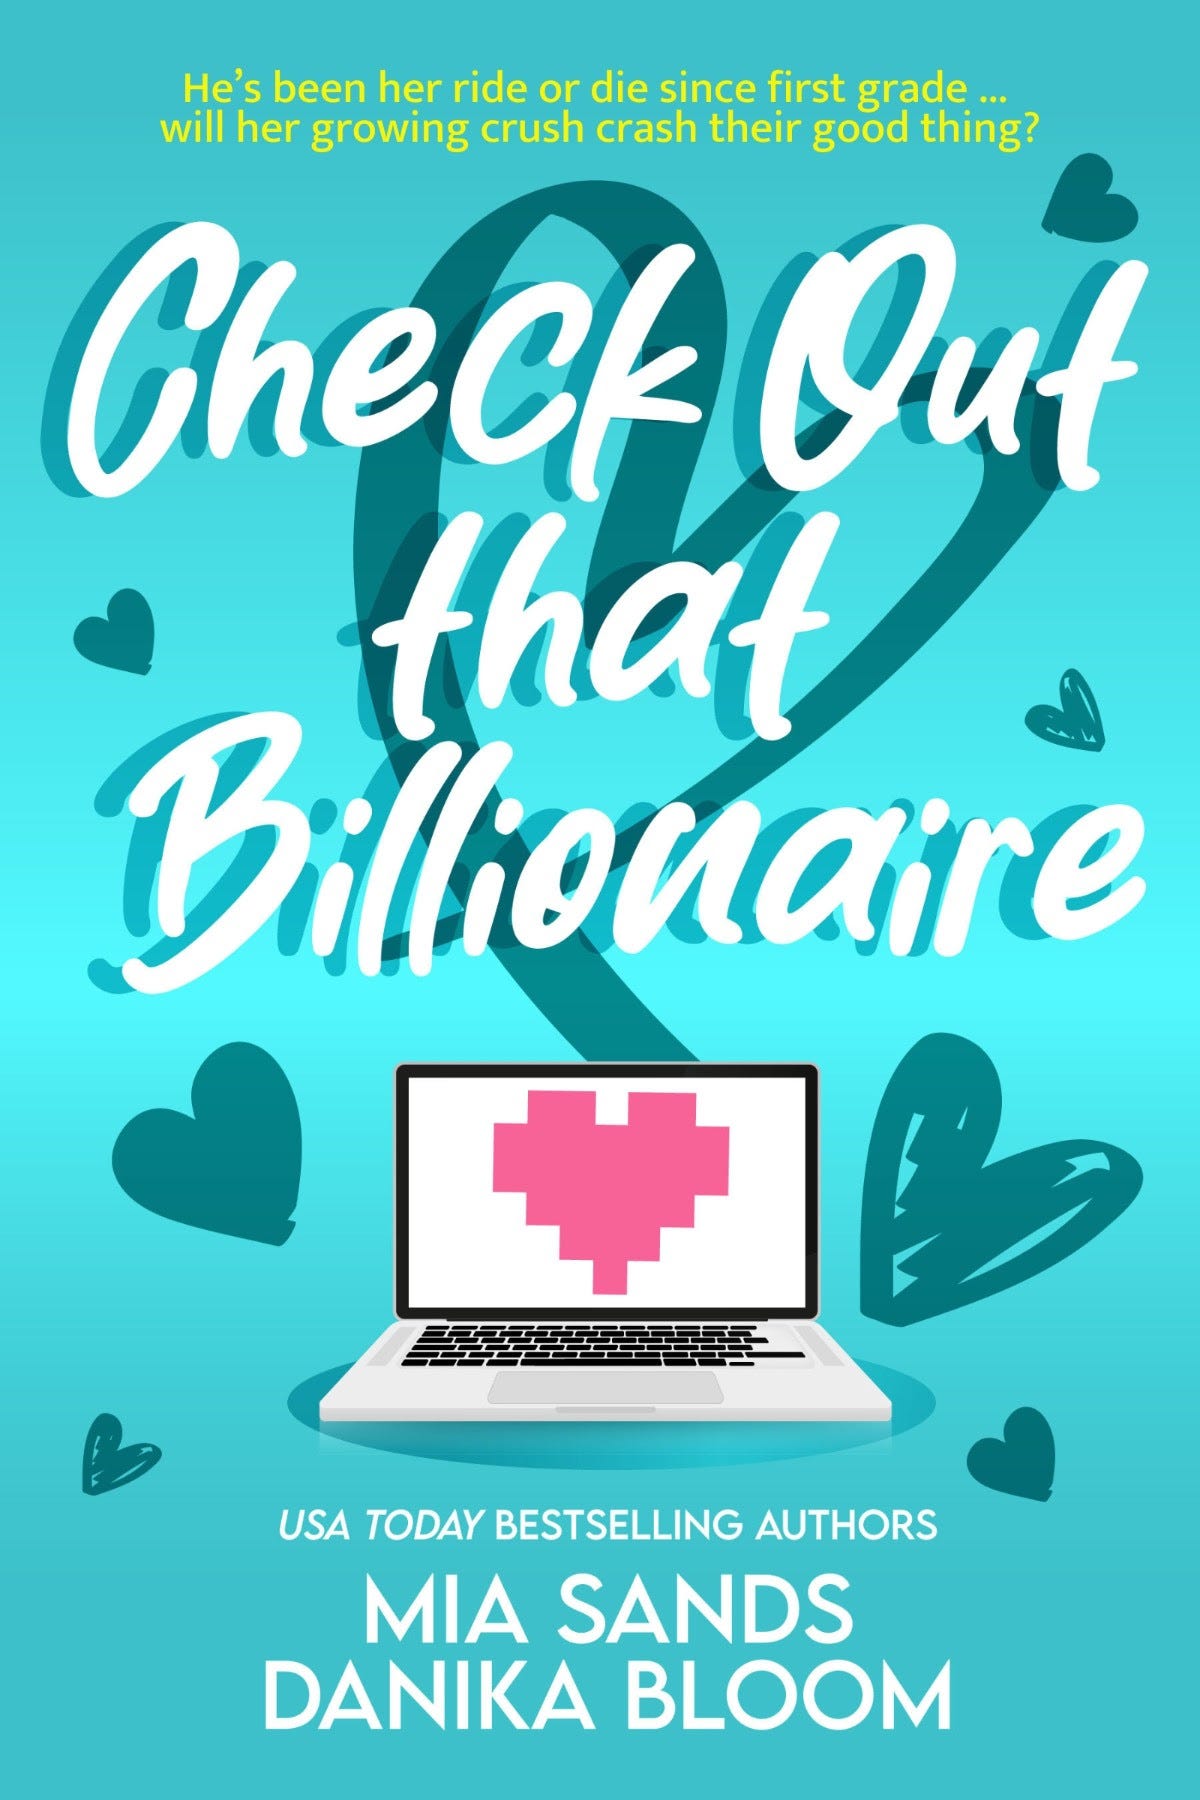 Book cover for "Check Out that Billionaire" by Mia Sands and Danika Bloom, featuring a laptop with a pixelated pink heart on the screen, and hearts in the background on a blue backdrop. 